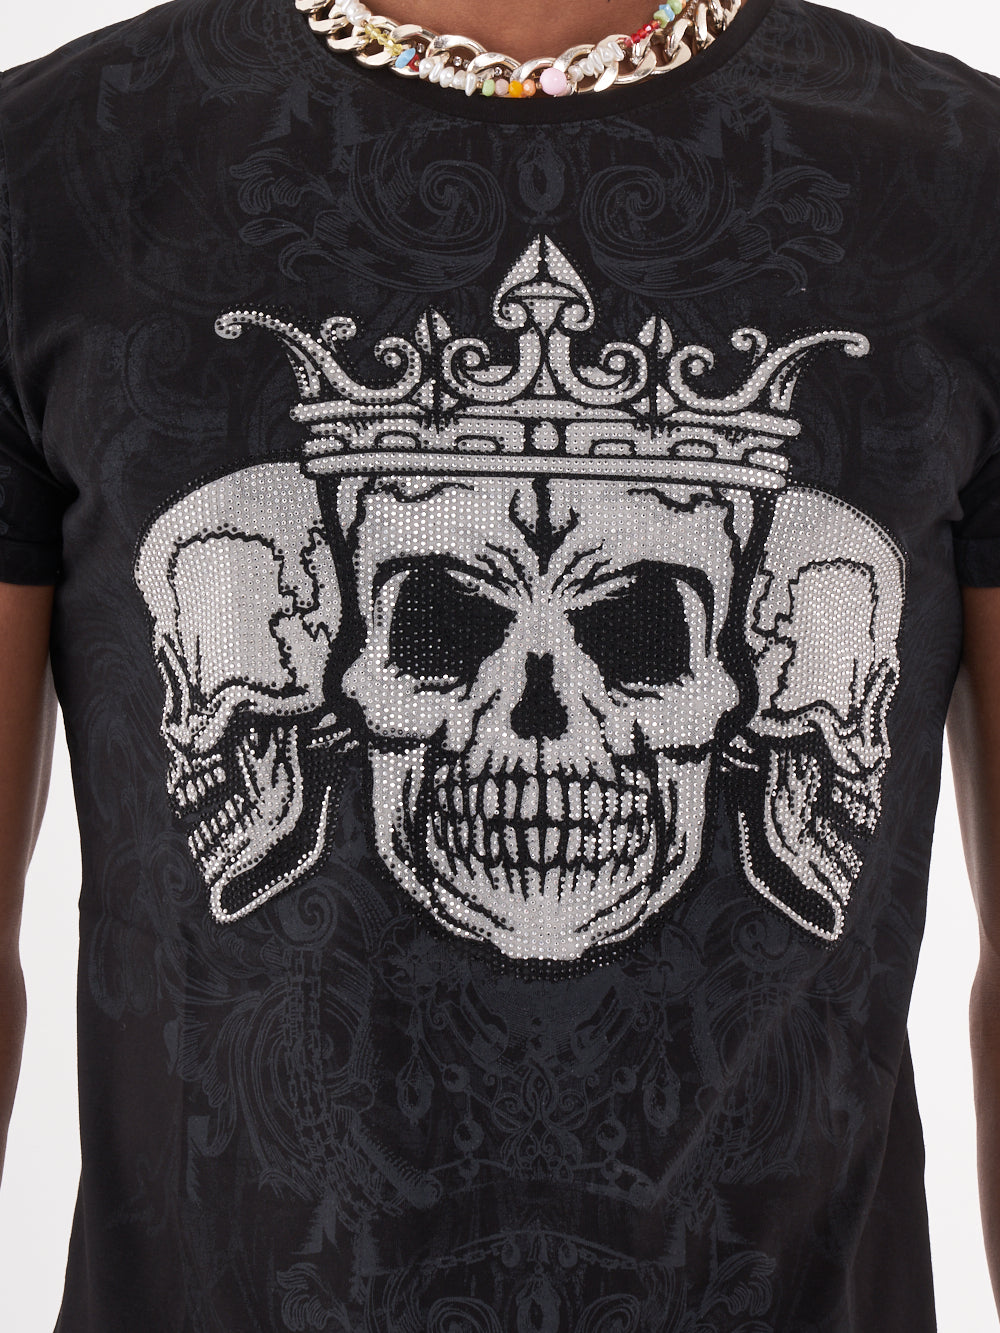 A man wearing a TRINITY T-SHIRT | BLACK with skeleton print.